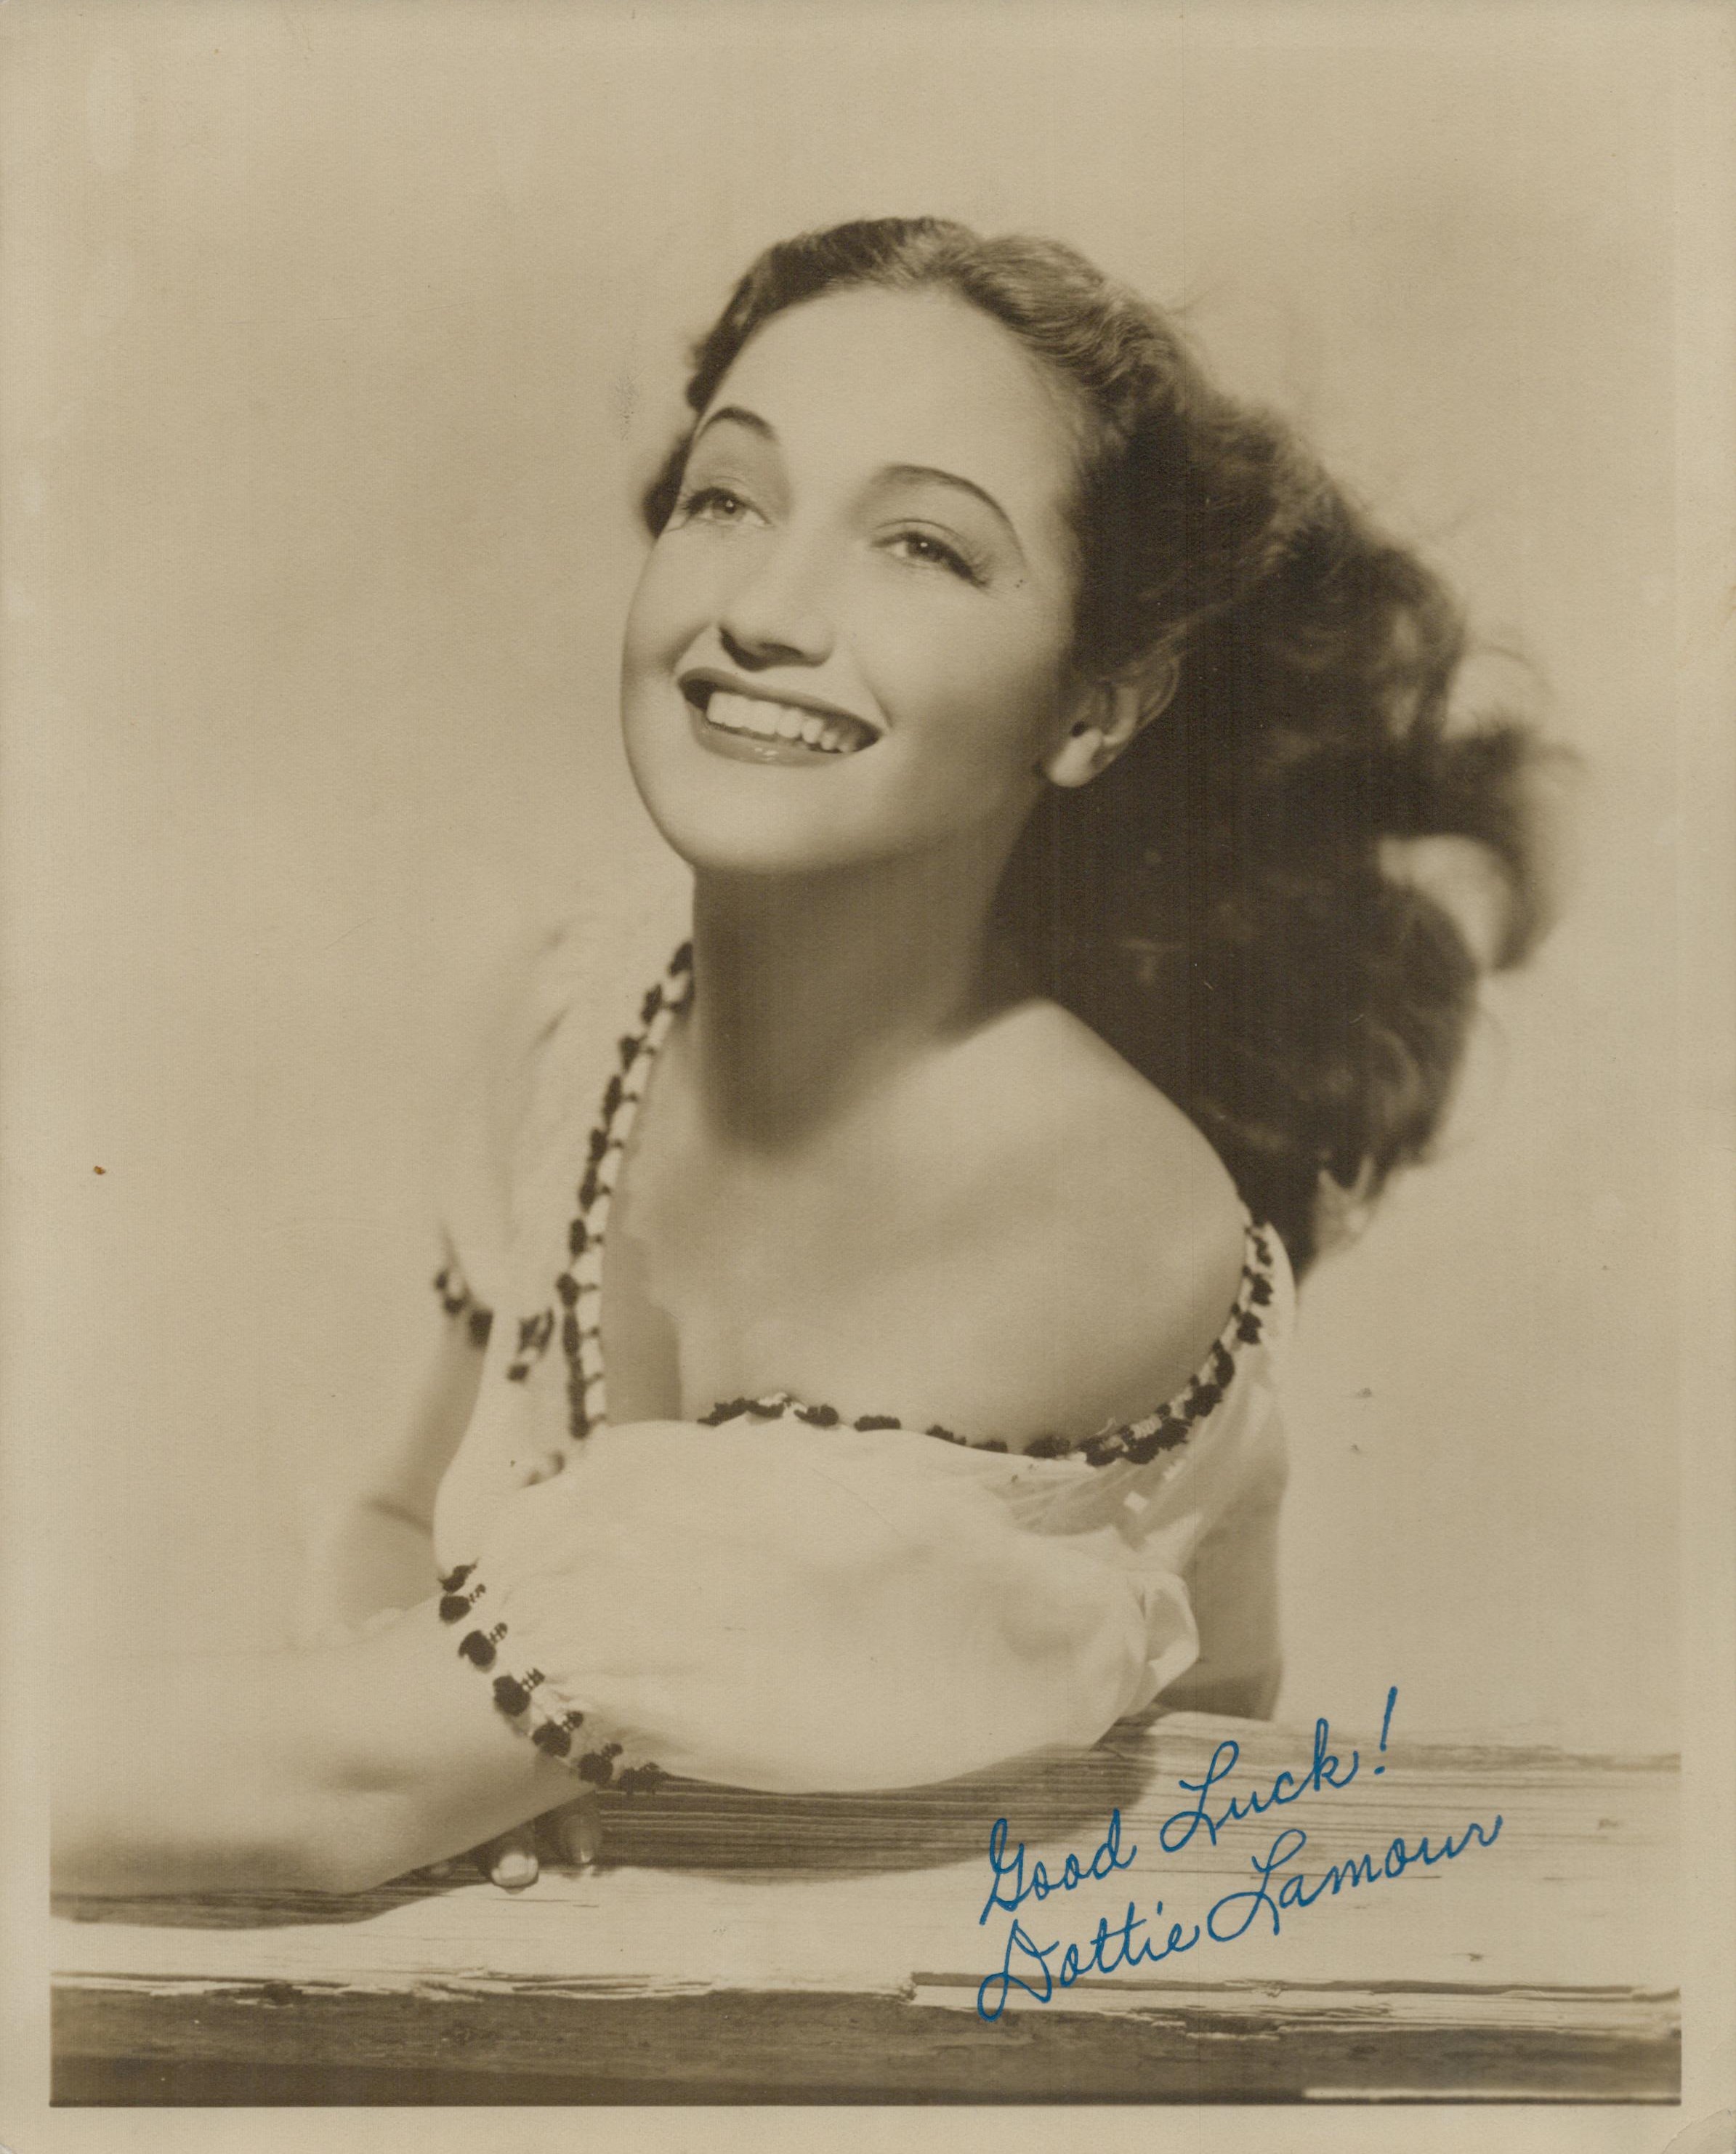 Dorothy Lamour signed 10x8 inch Sepia vintage photo. Good Condition. All autographs come with a